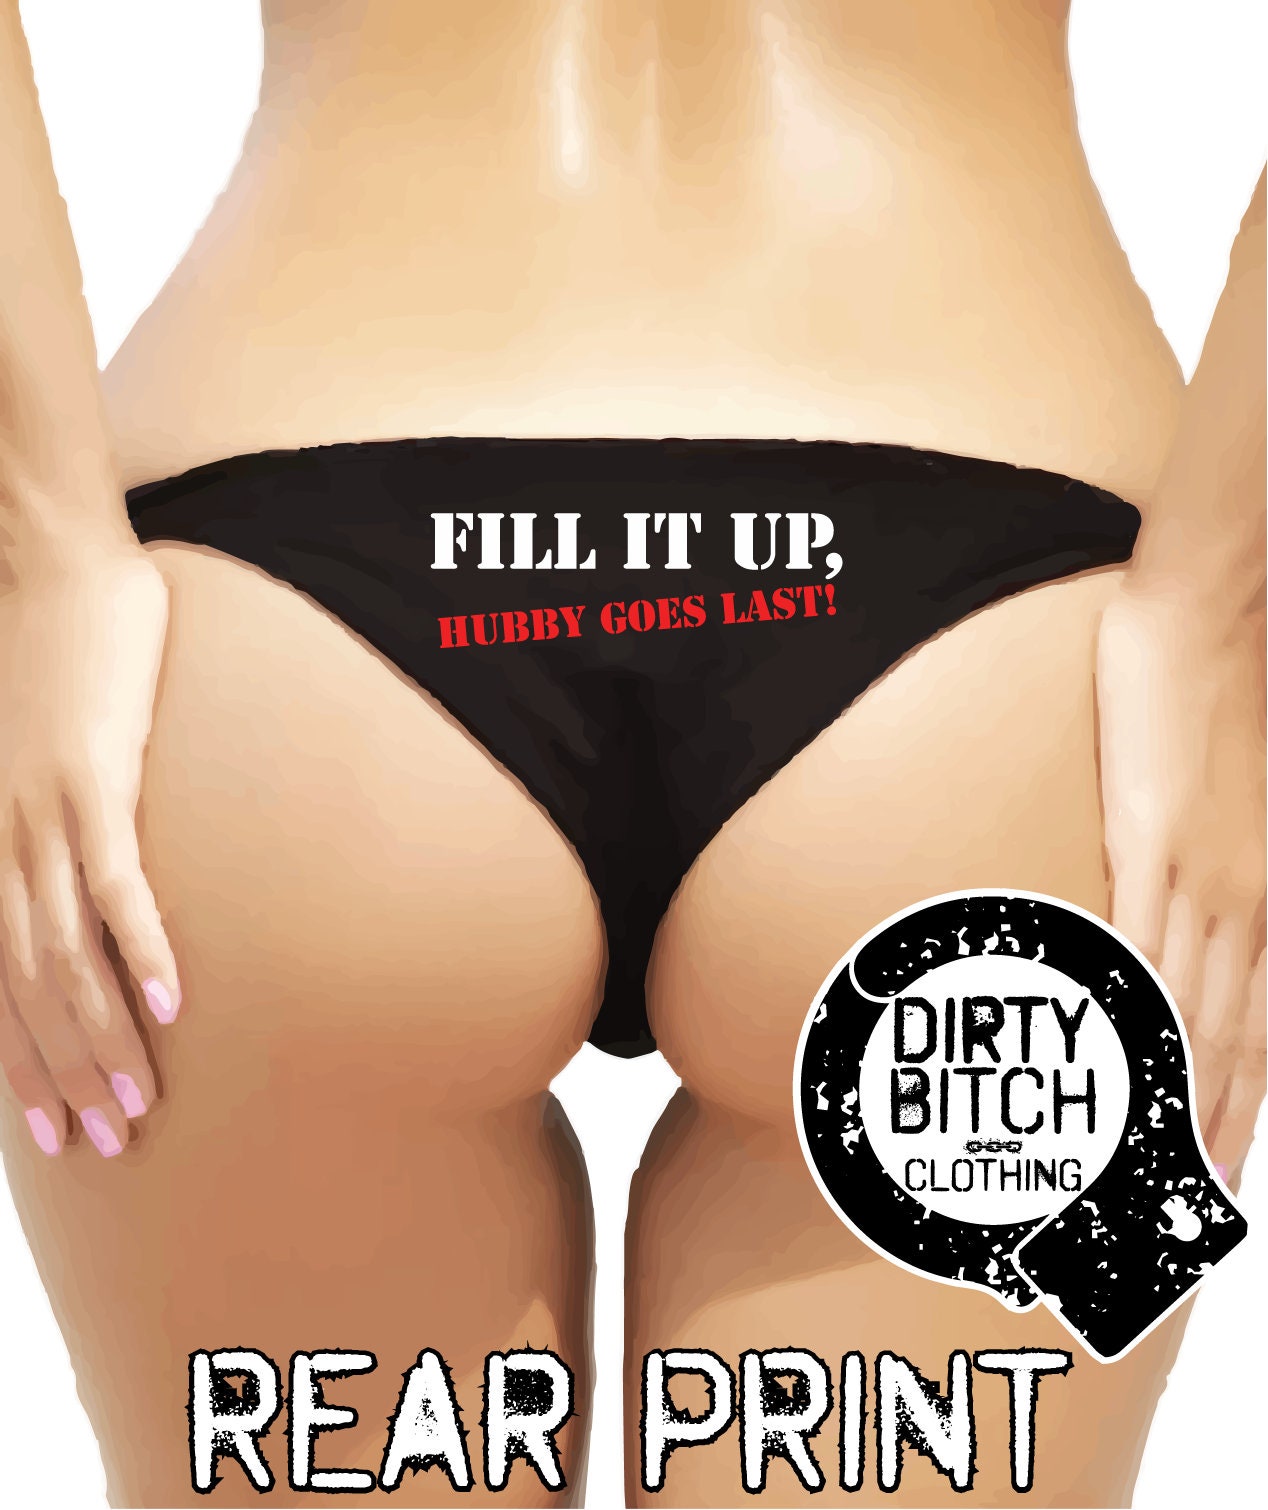 Fill It Up Hubby Goes Last rear Printadult image